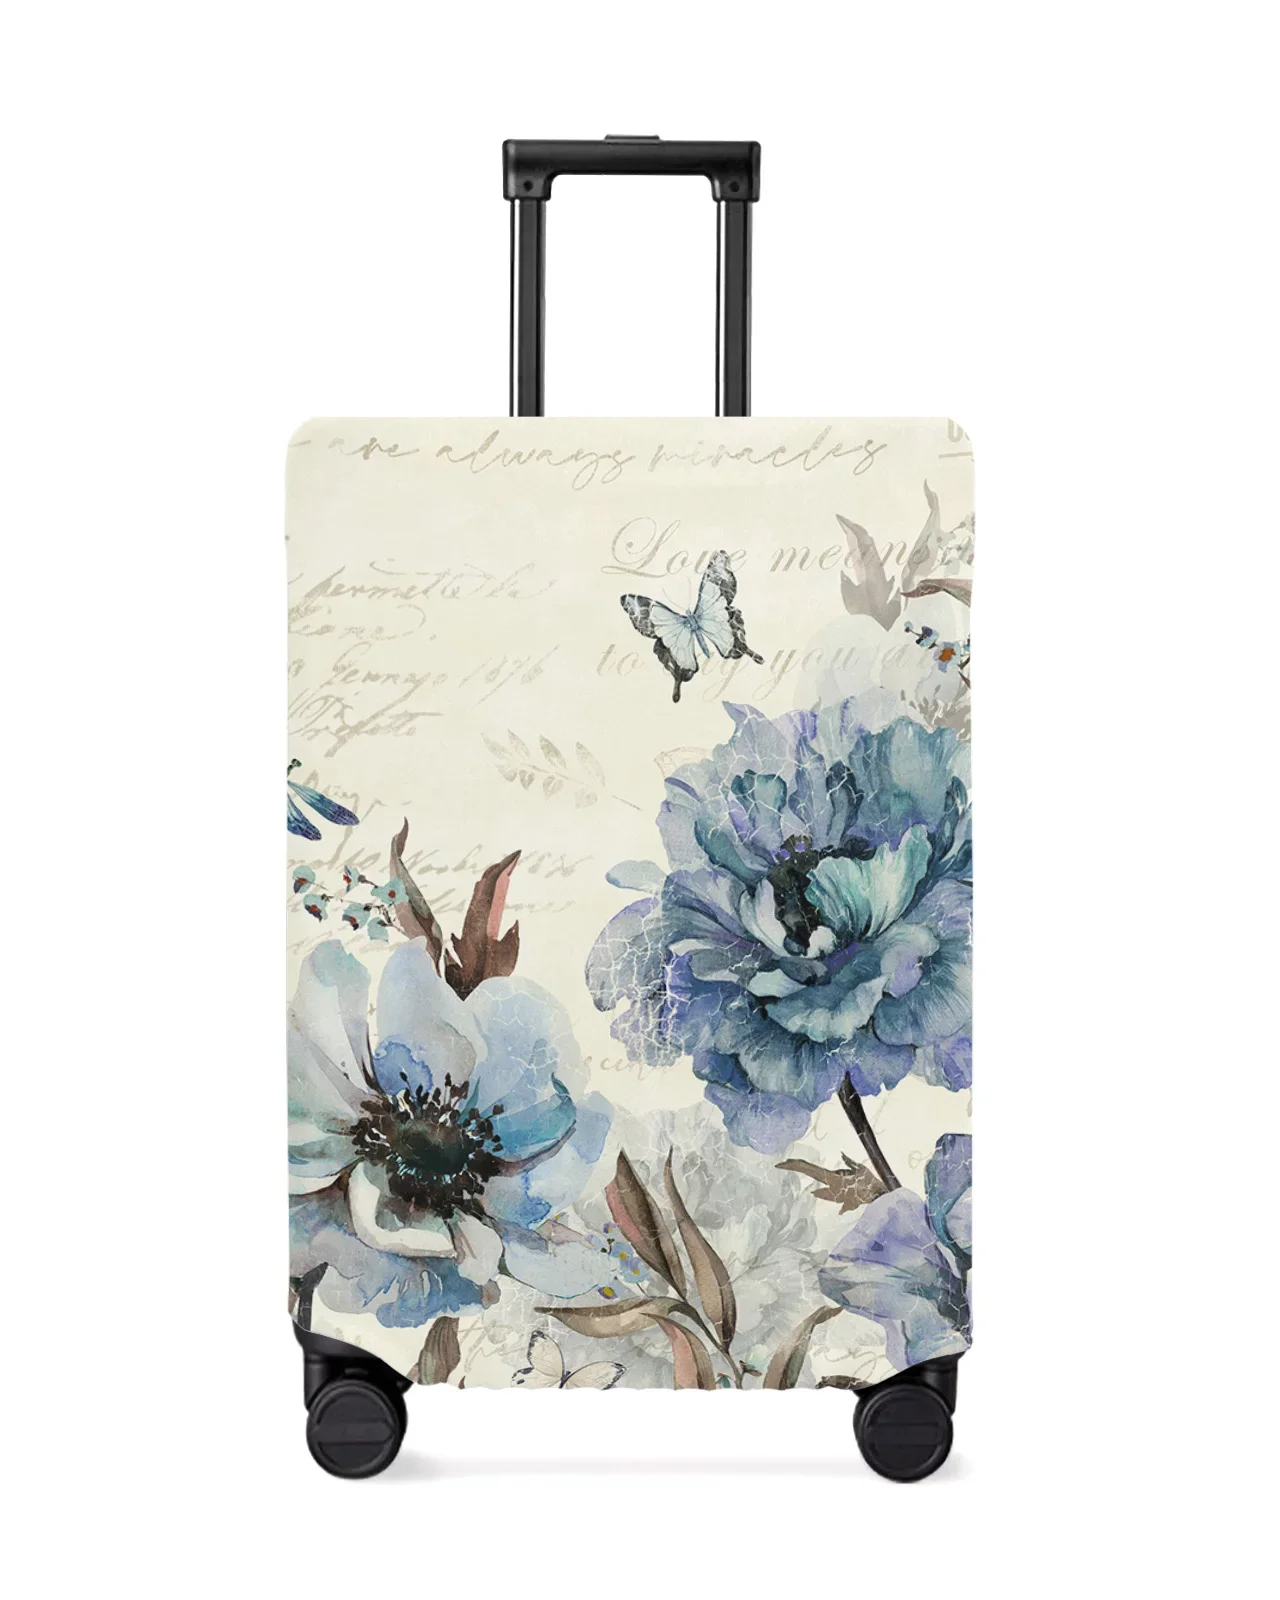 

Vintage Flowers Butterflies Peonies Luggage Cover Stretch Baggage Protector Dust Cover for 18-32 Inch Travel Suitcase Case